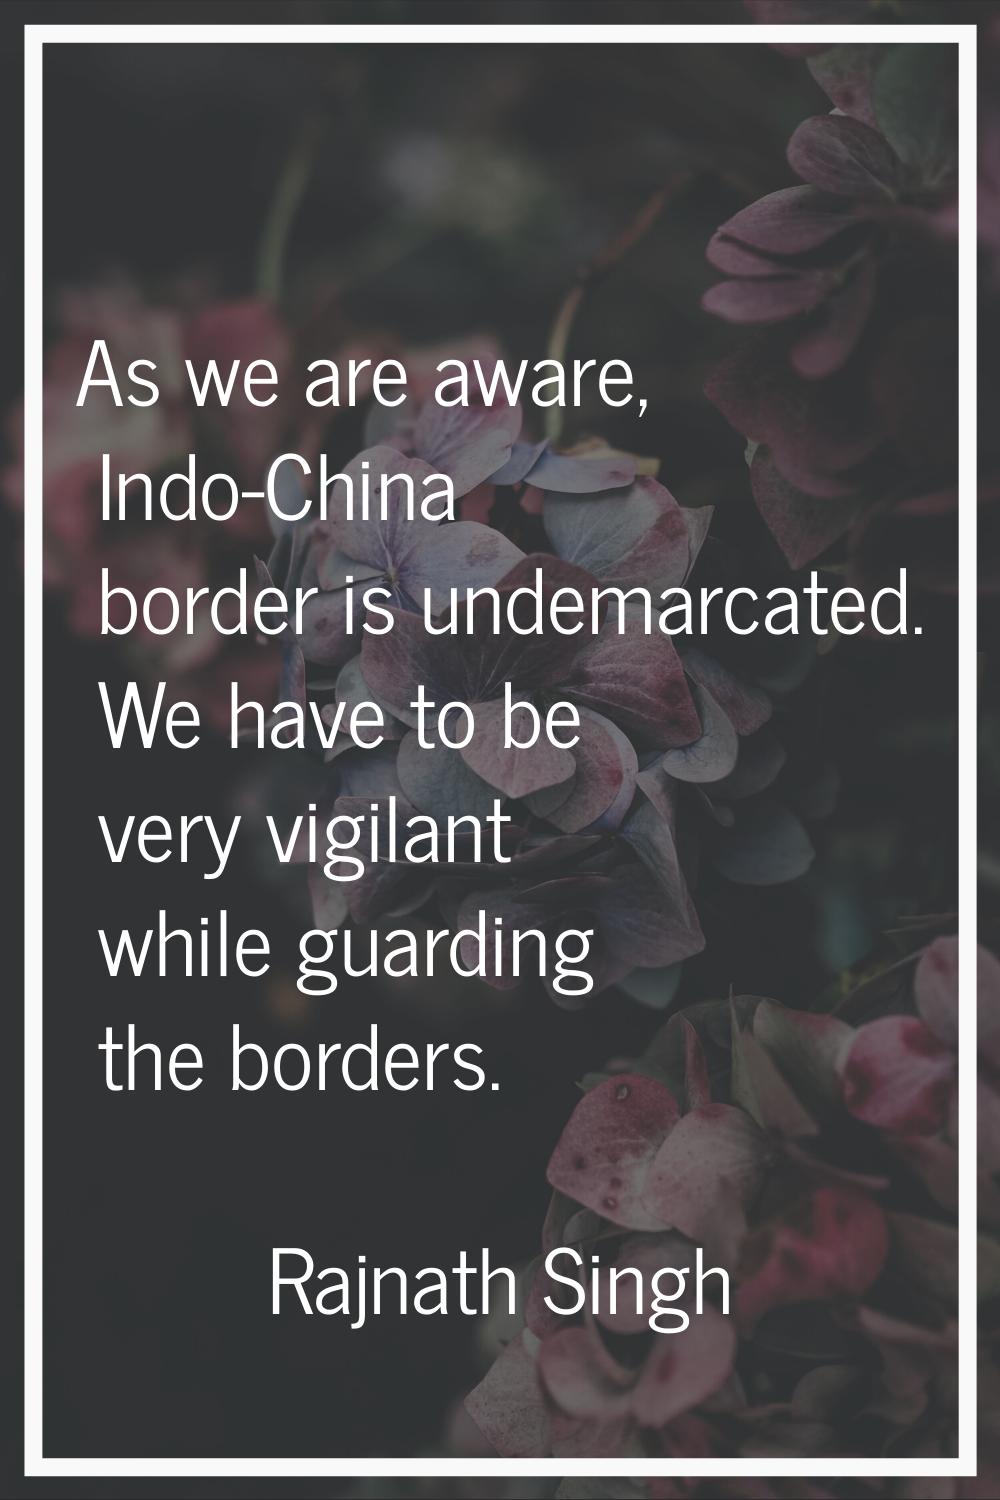 As we are aware, Indo-China border is undemarcated. We have to be very vigilant while guarding the 